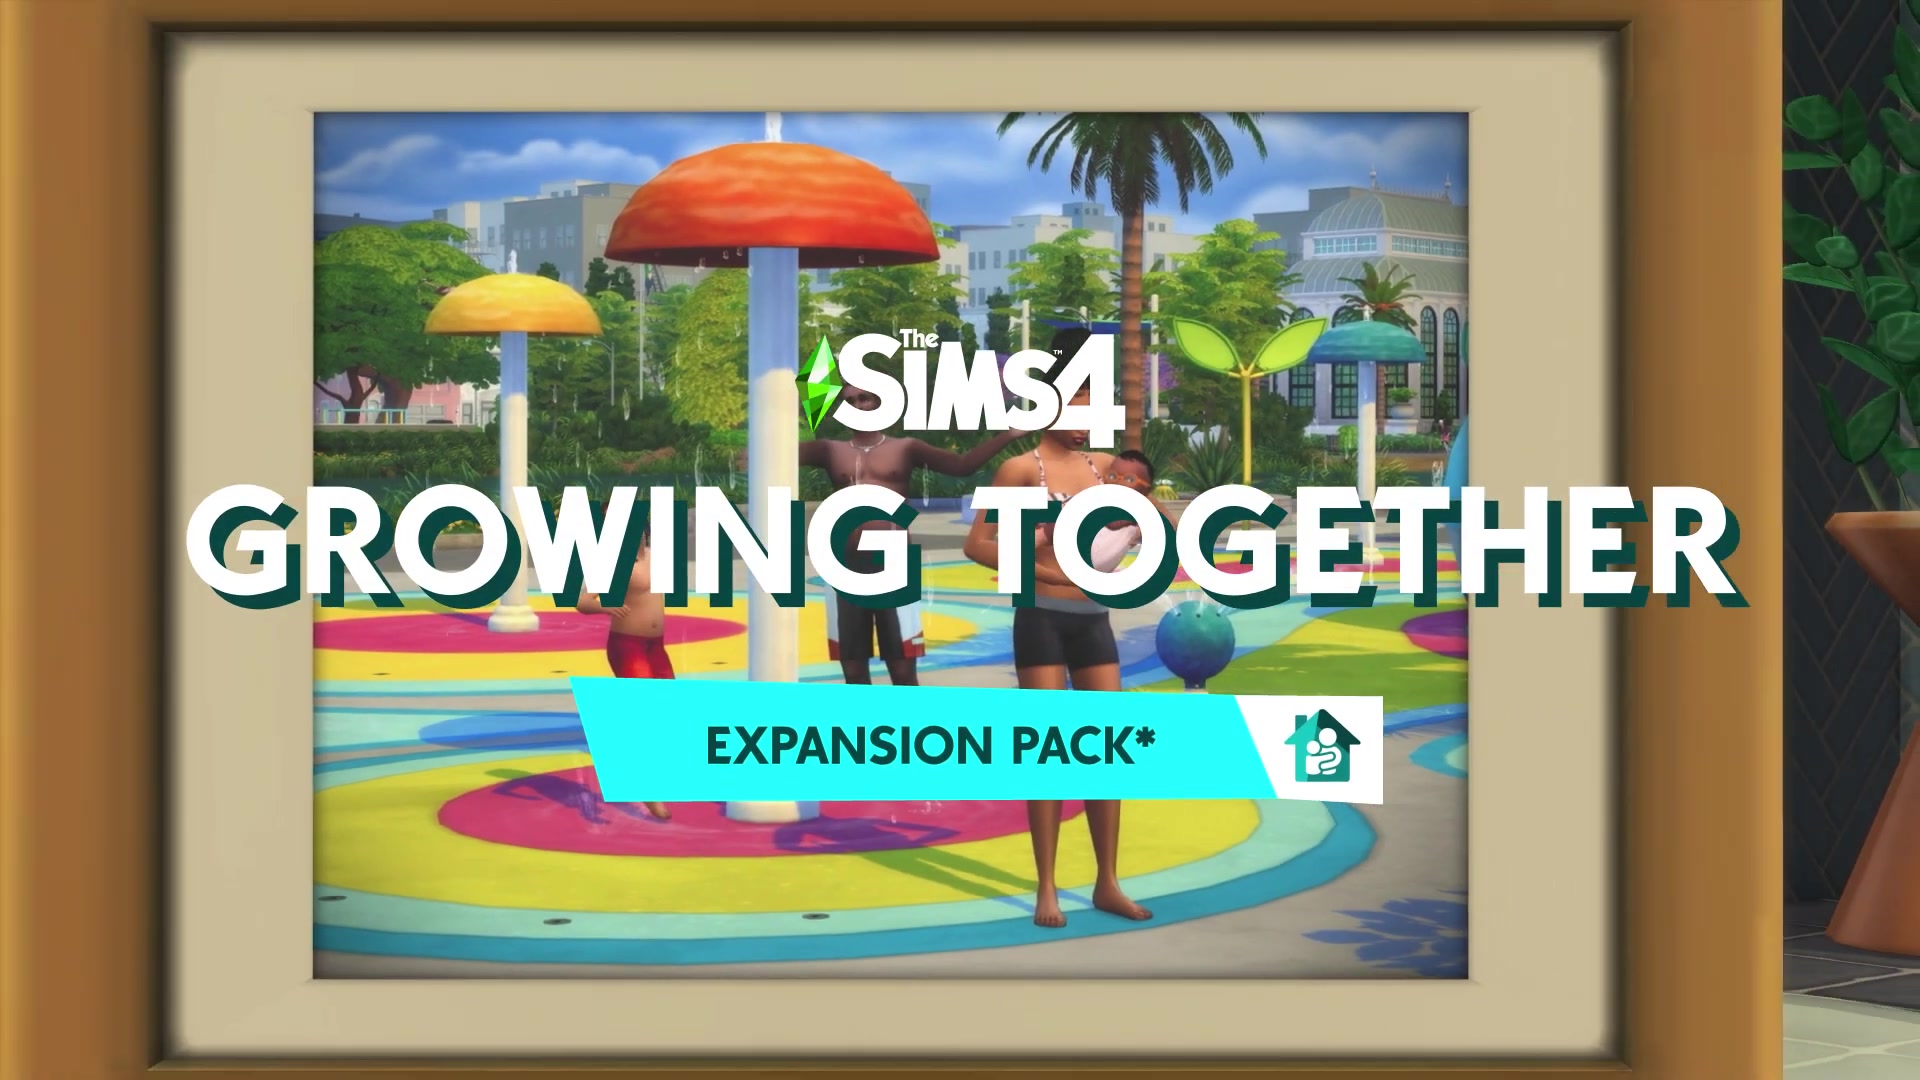 Buy The Sims™ 4 Growing Together Expansion Pack